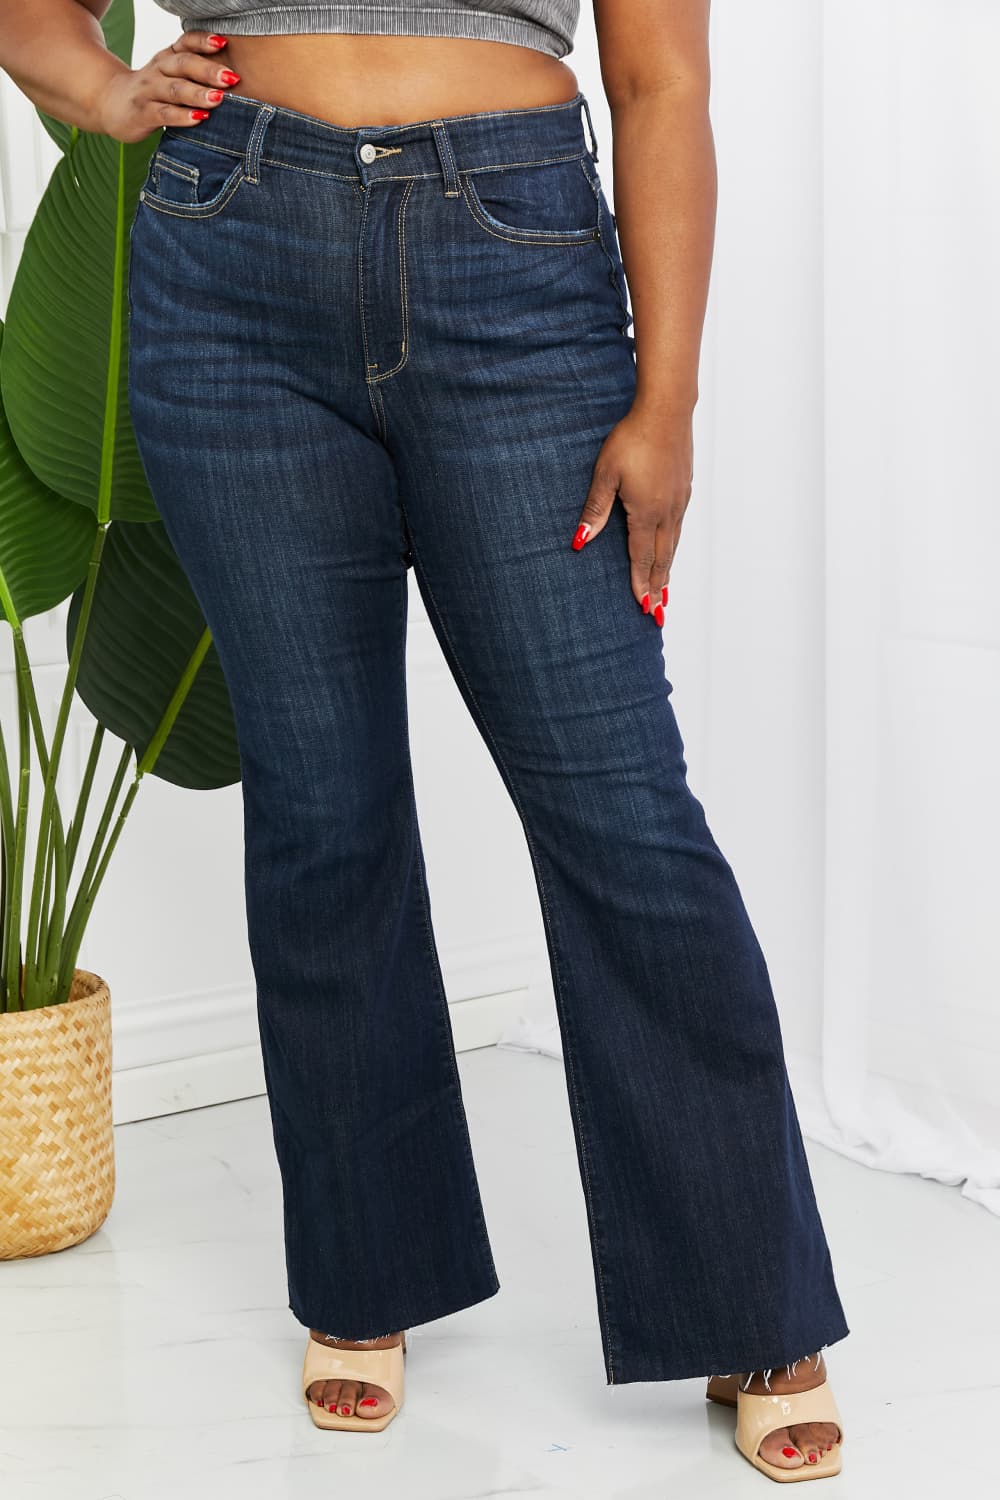 Judy Blue Tiffany Full Size Mid Rise Flare Jeans